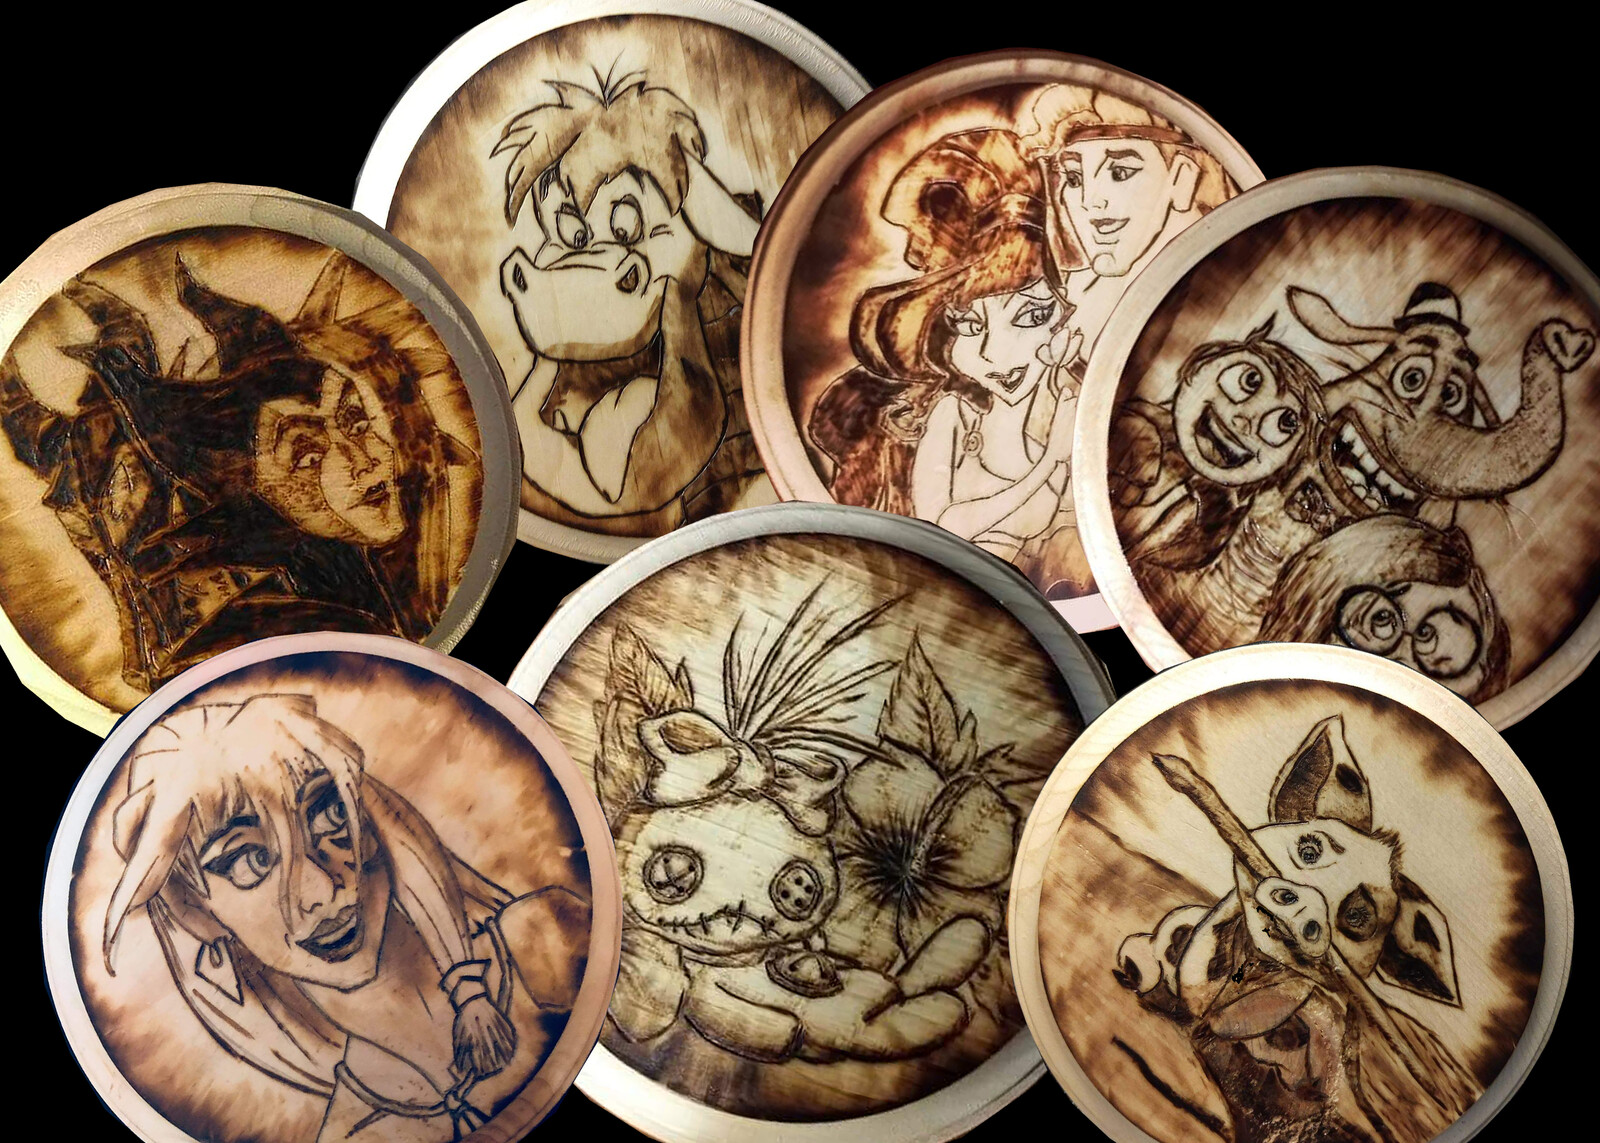 Disney Coaster set I was commissioned to create! 
From top left over: Maleficent, Pete's Dragon, Hercules and Meg, Bing Bong/Joy/Sadness, Kida, Scrump, and Pua! 